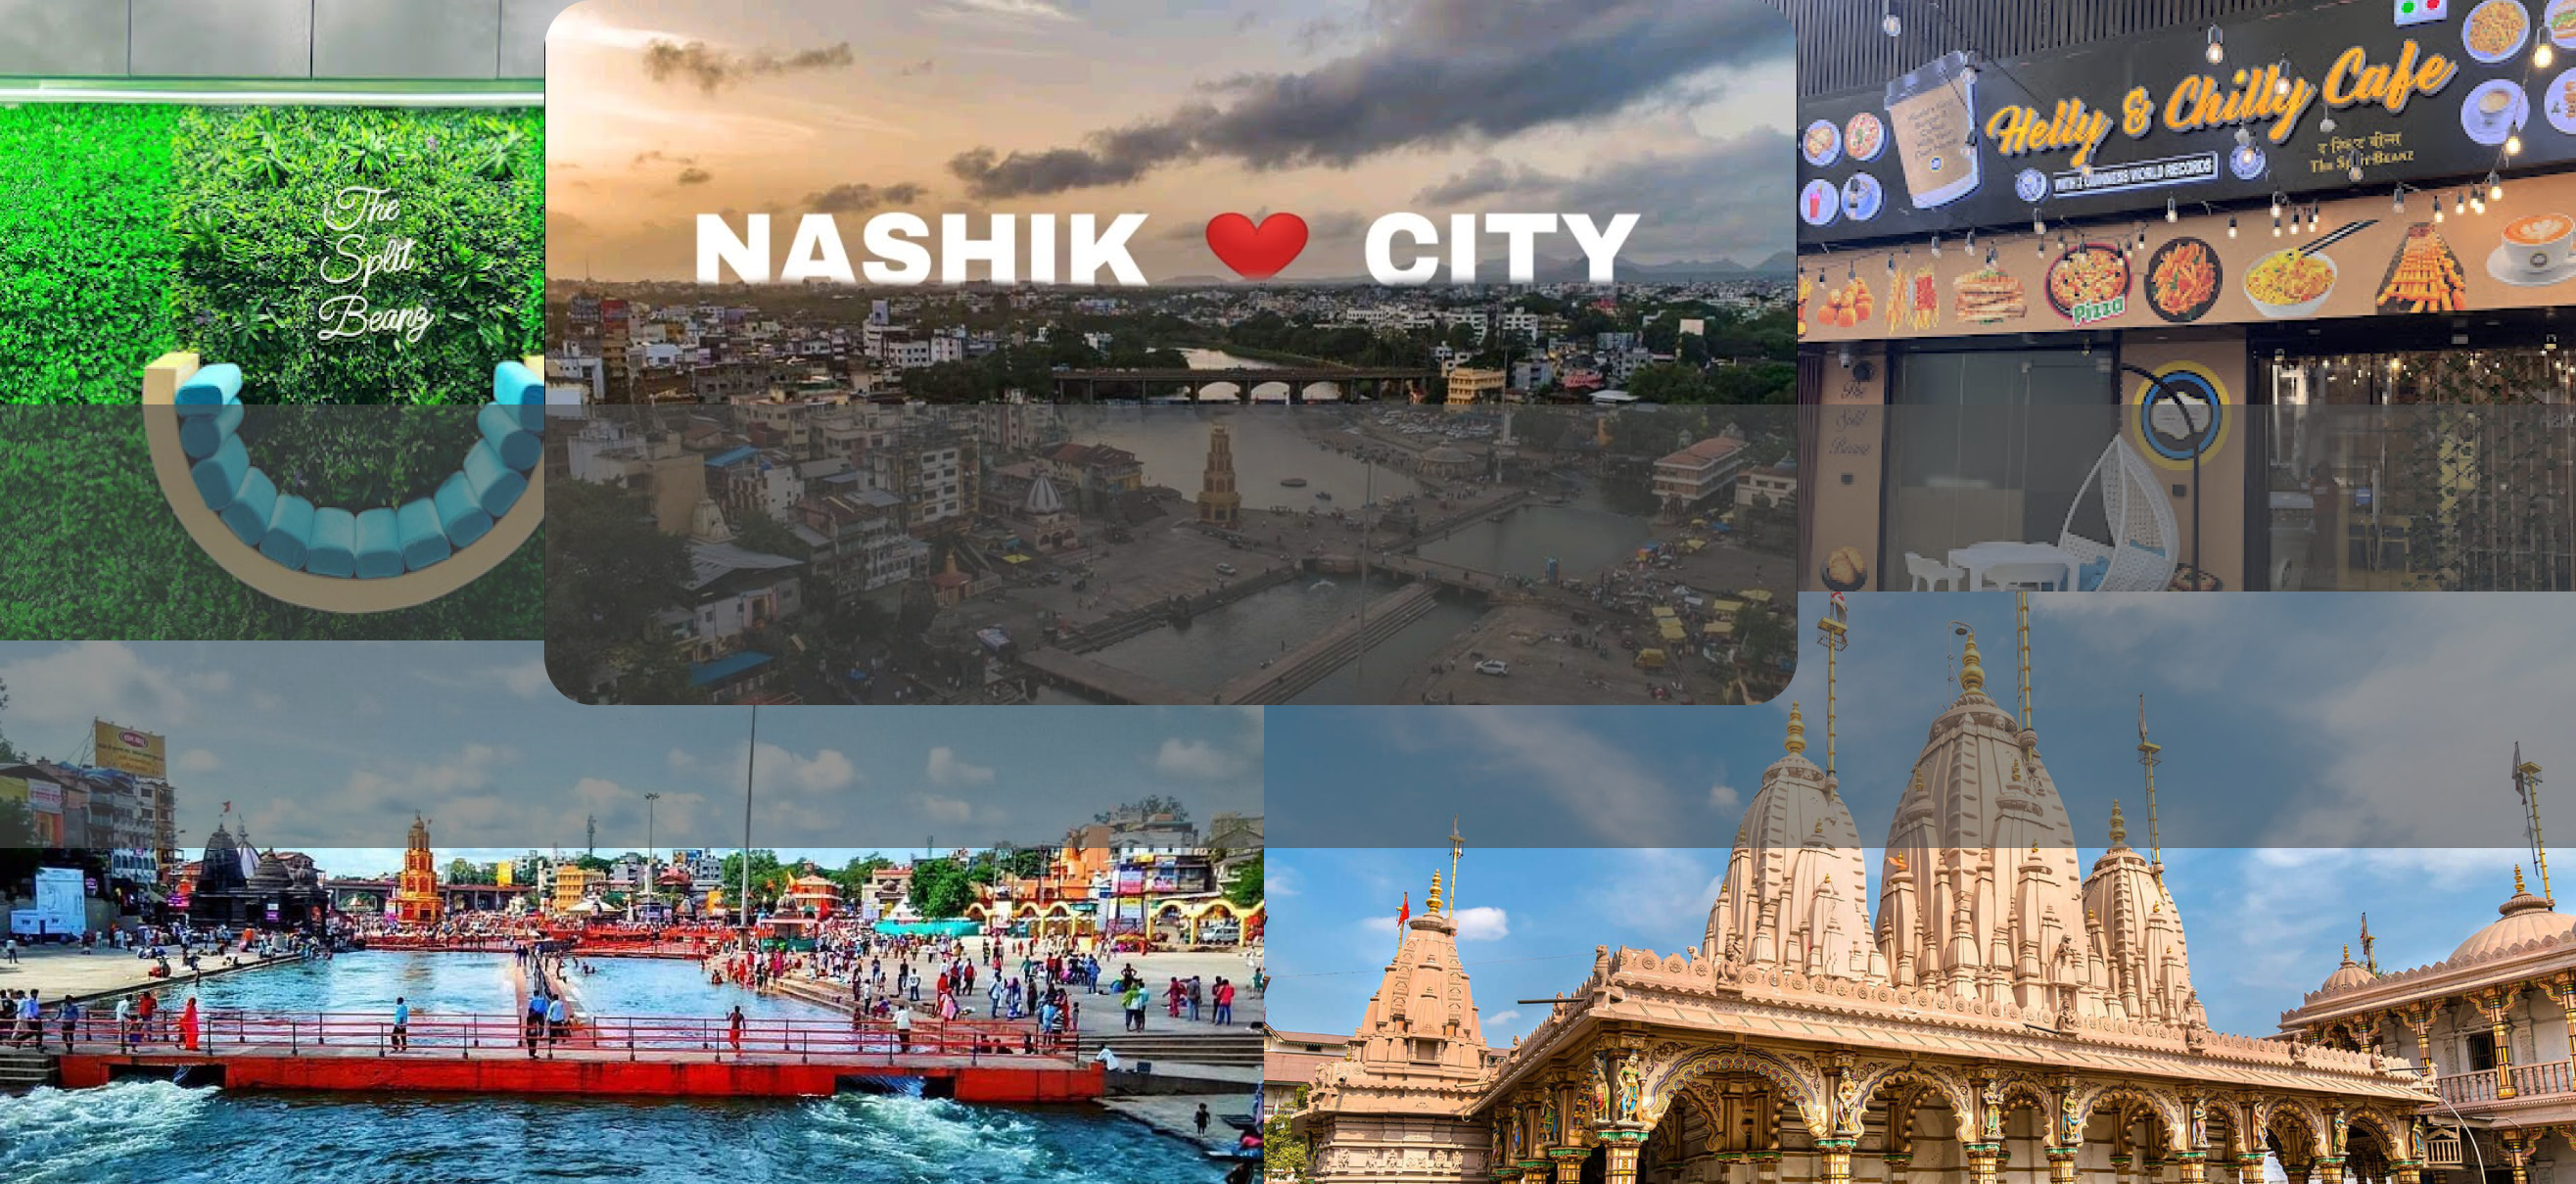 The Ultimate Guide to Things to Do in Nashik & The best place for couples in Nashik